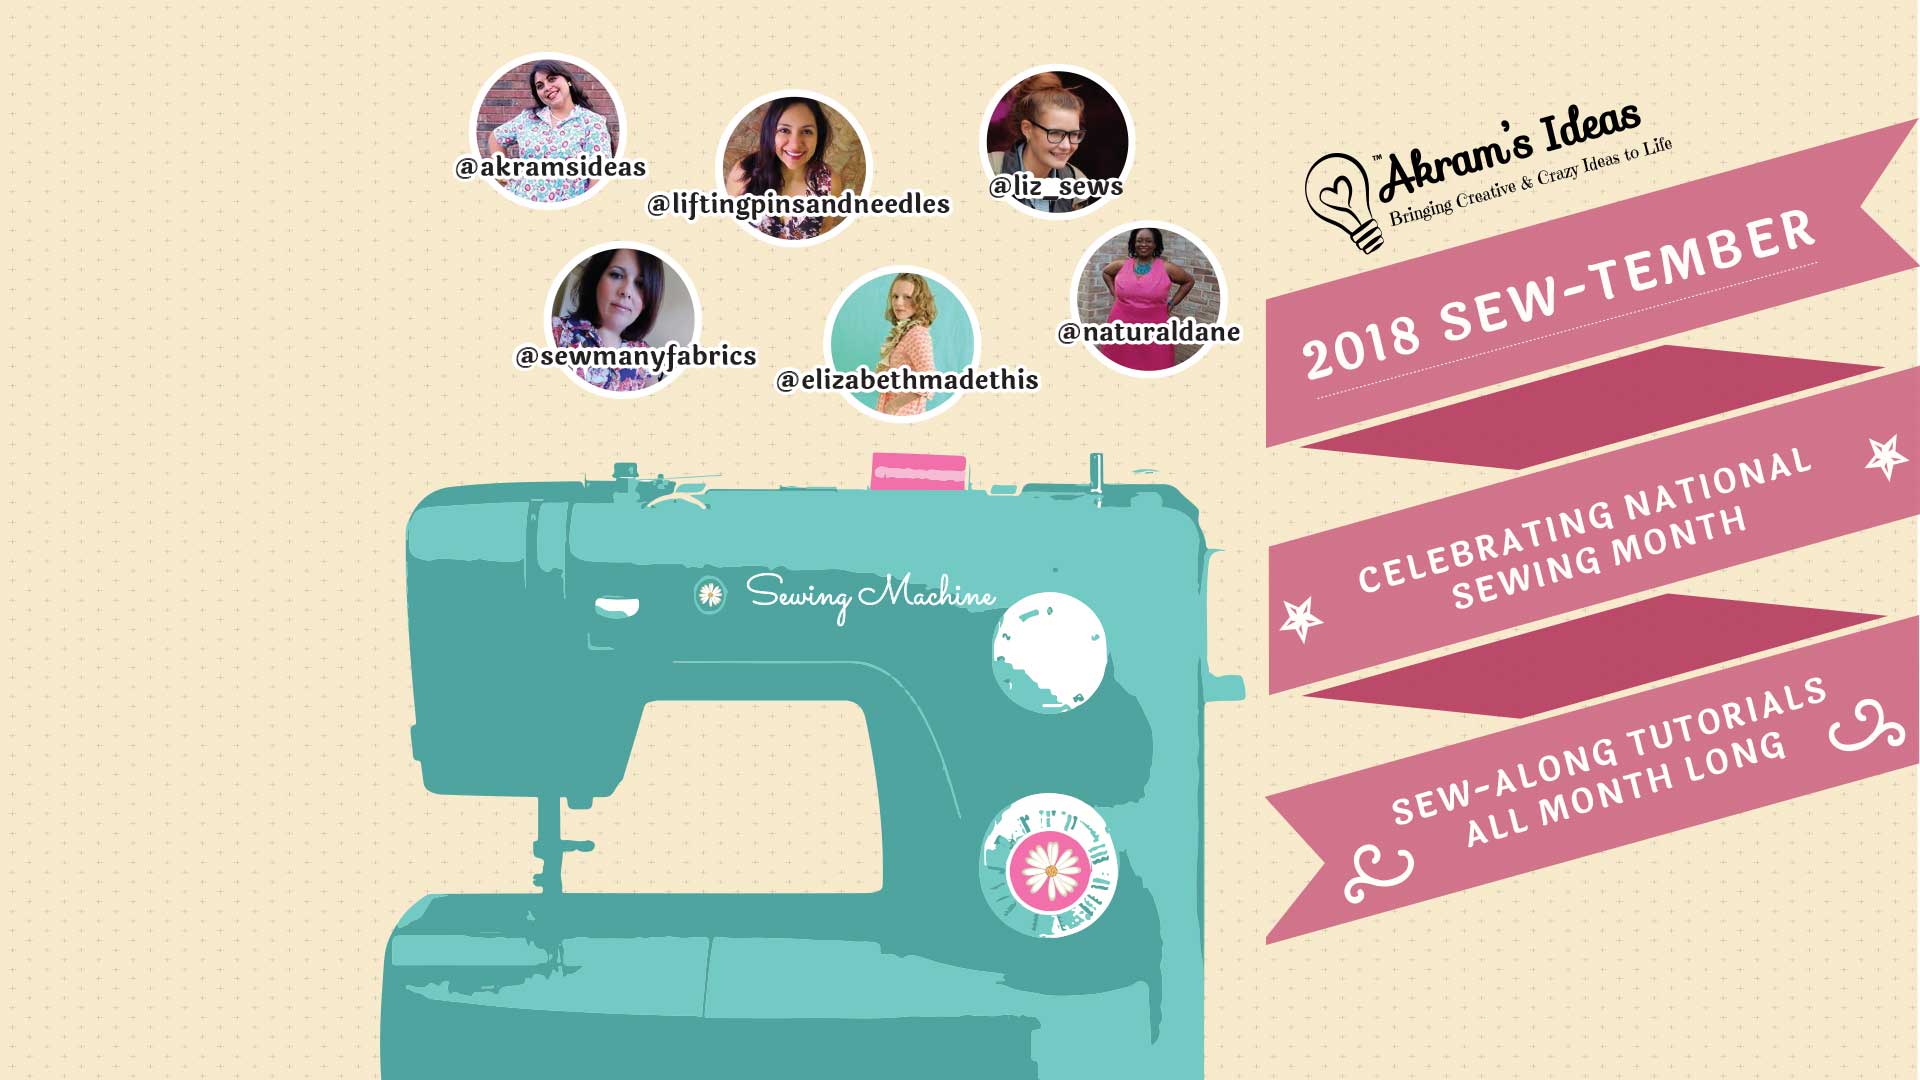 We are celebrating National Sewing month (September) with the #SEWtember2018 sew-along challenge.